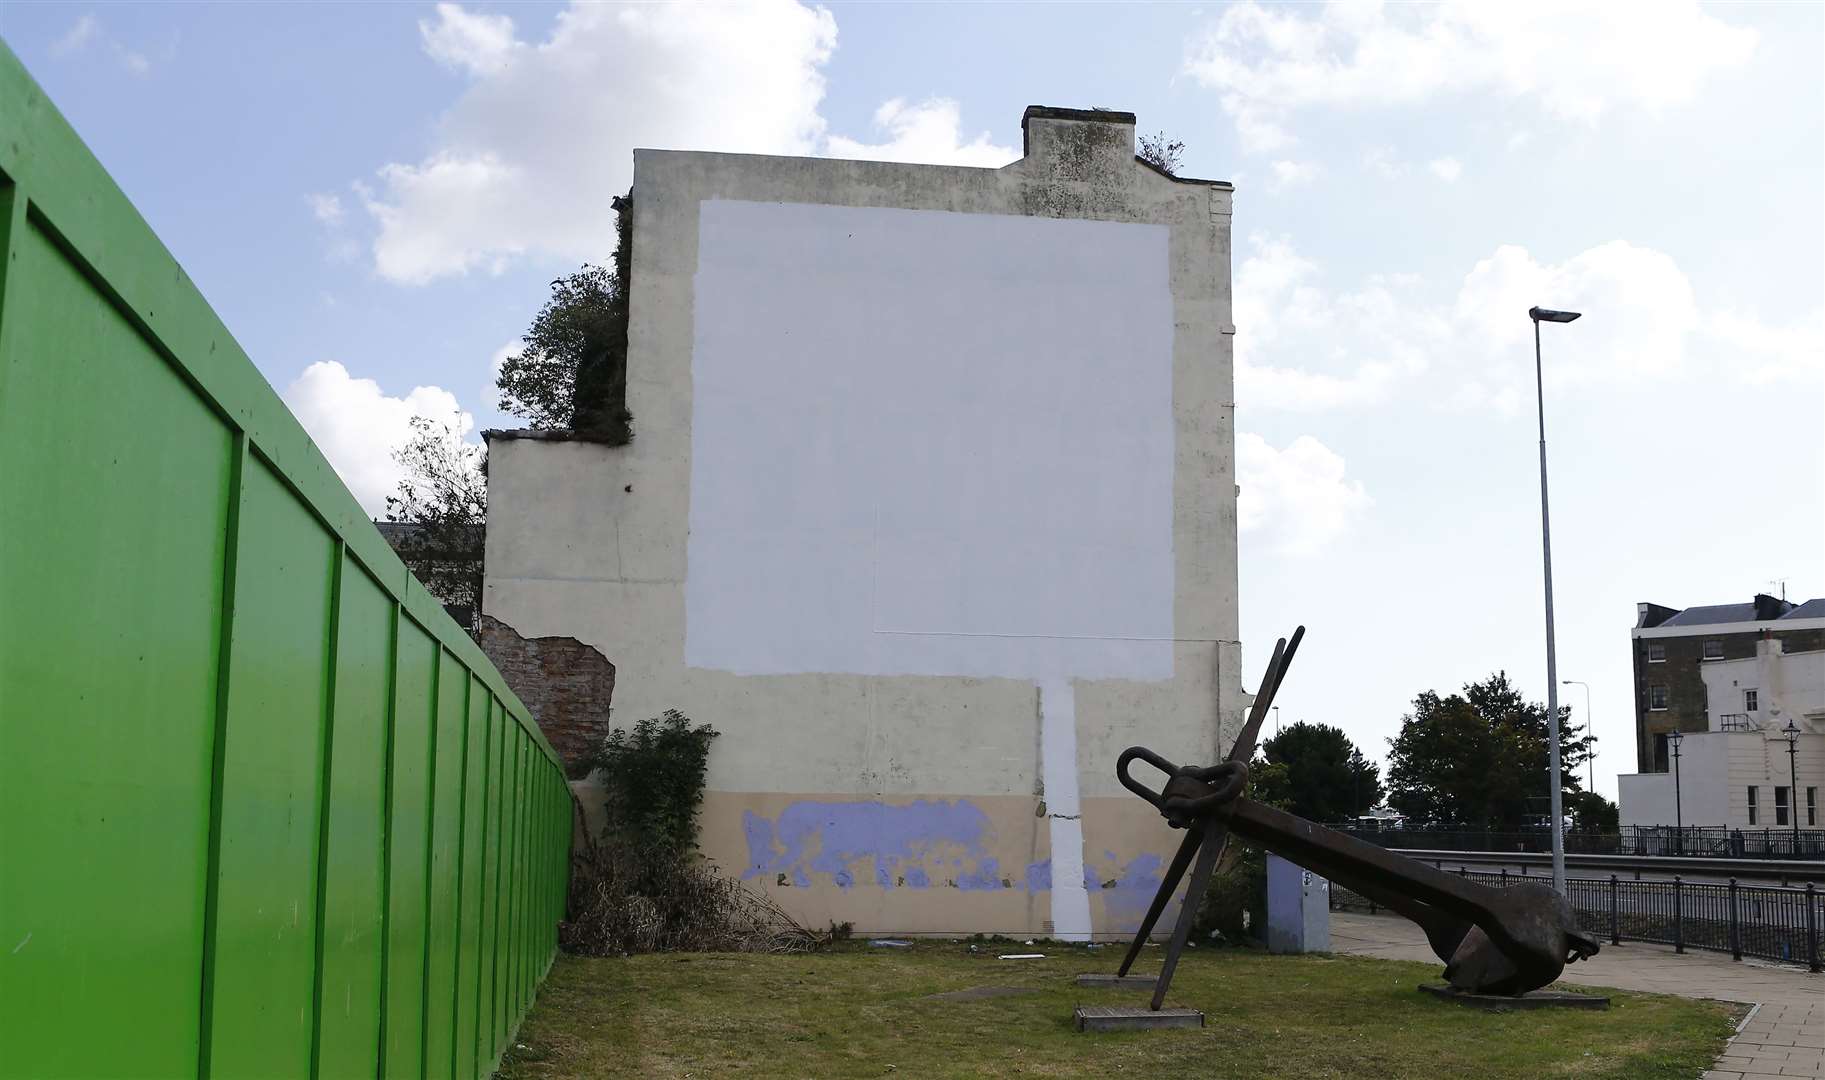 The flank wall after the mural was covered up in August 2019. Picture: Matt Bristow